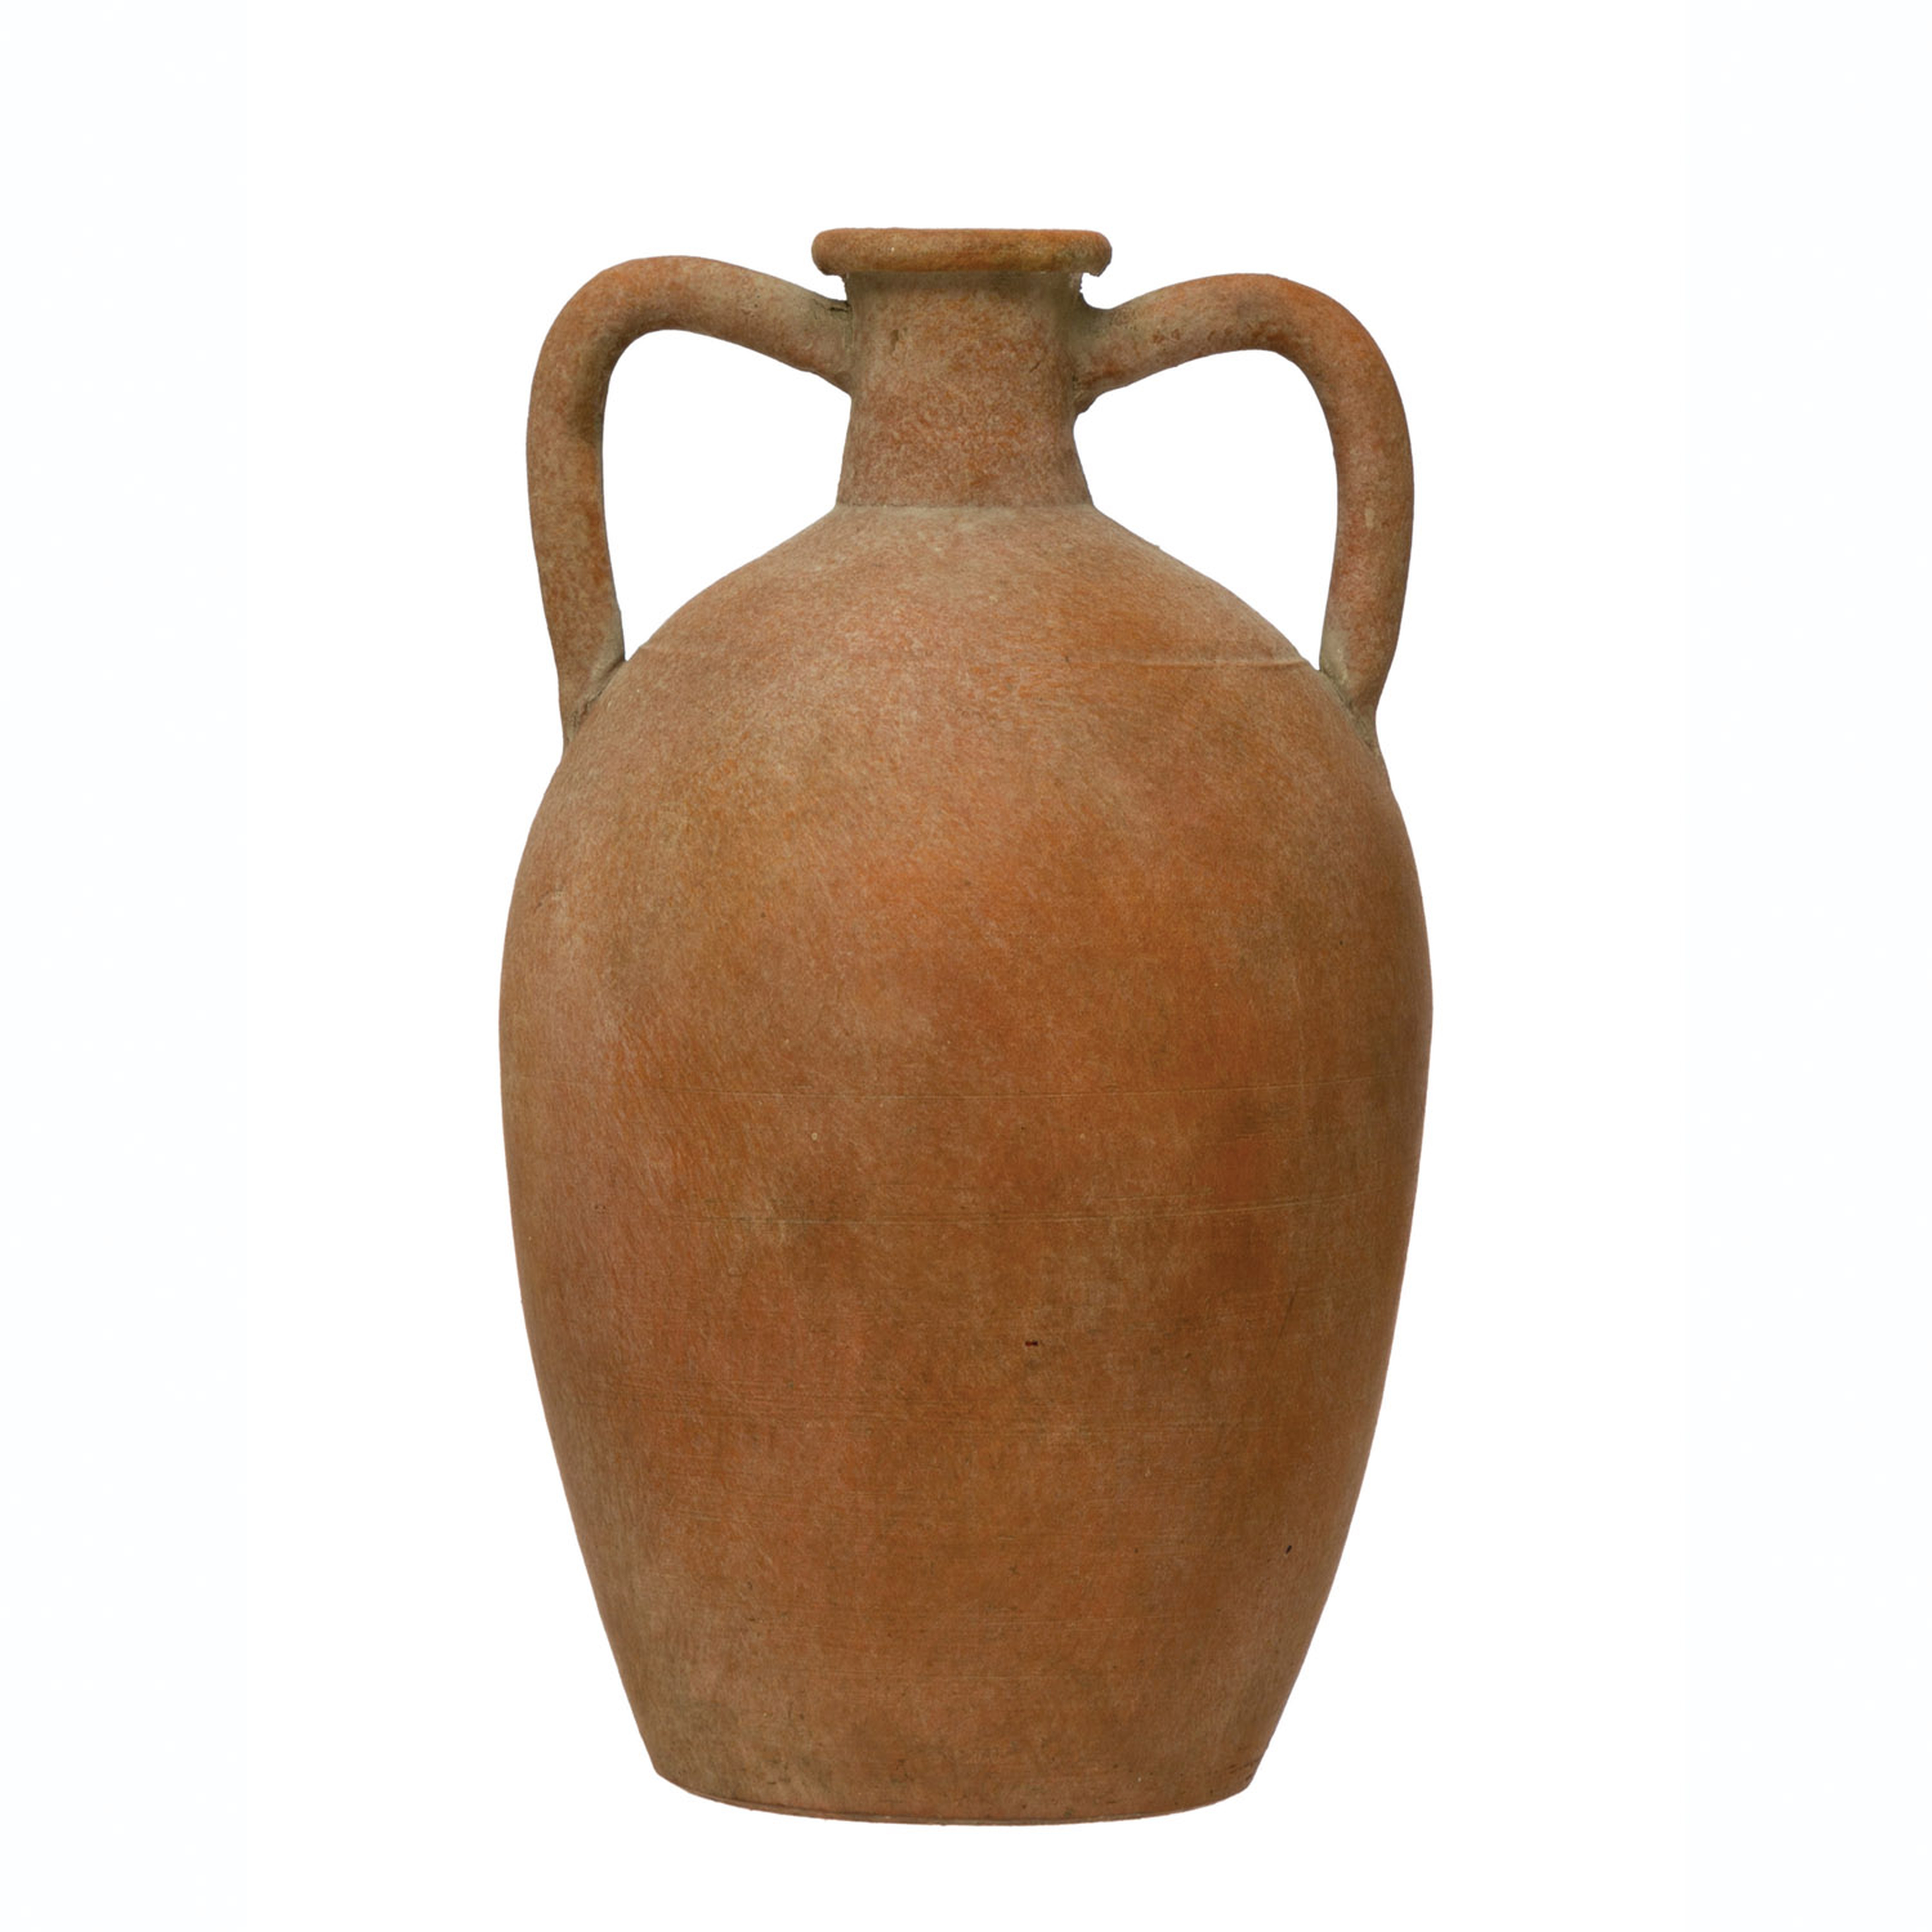 Terra-cotta Urn with Handles - Nomad Home